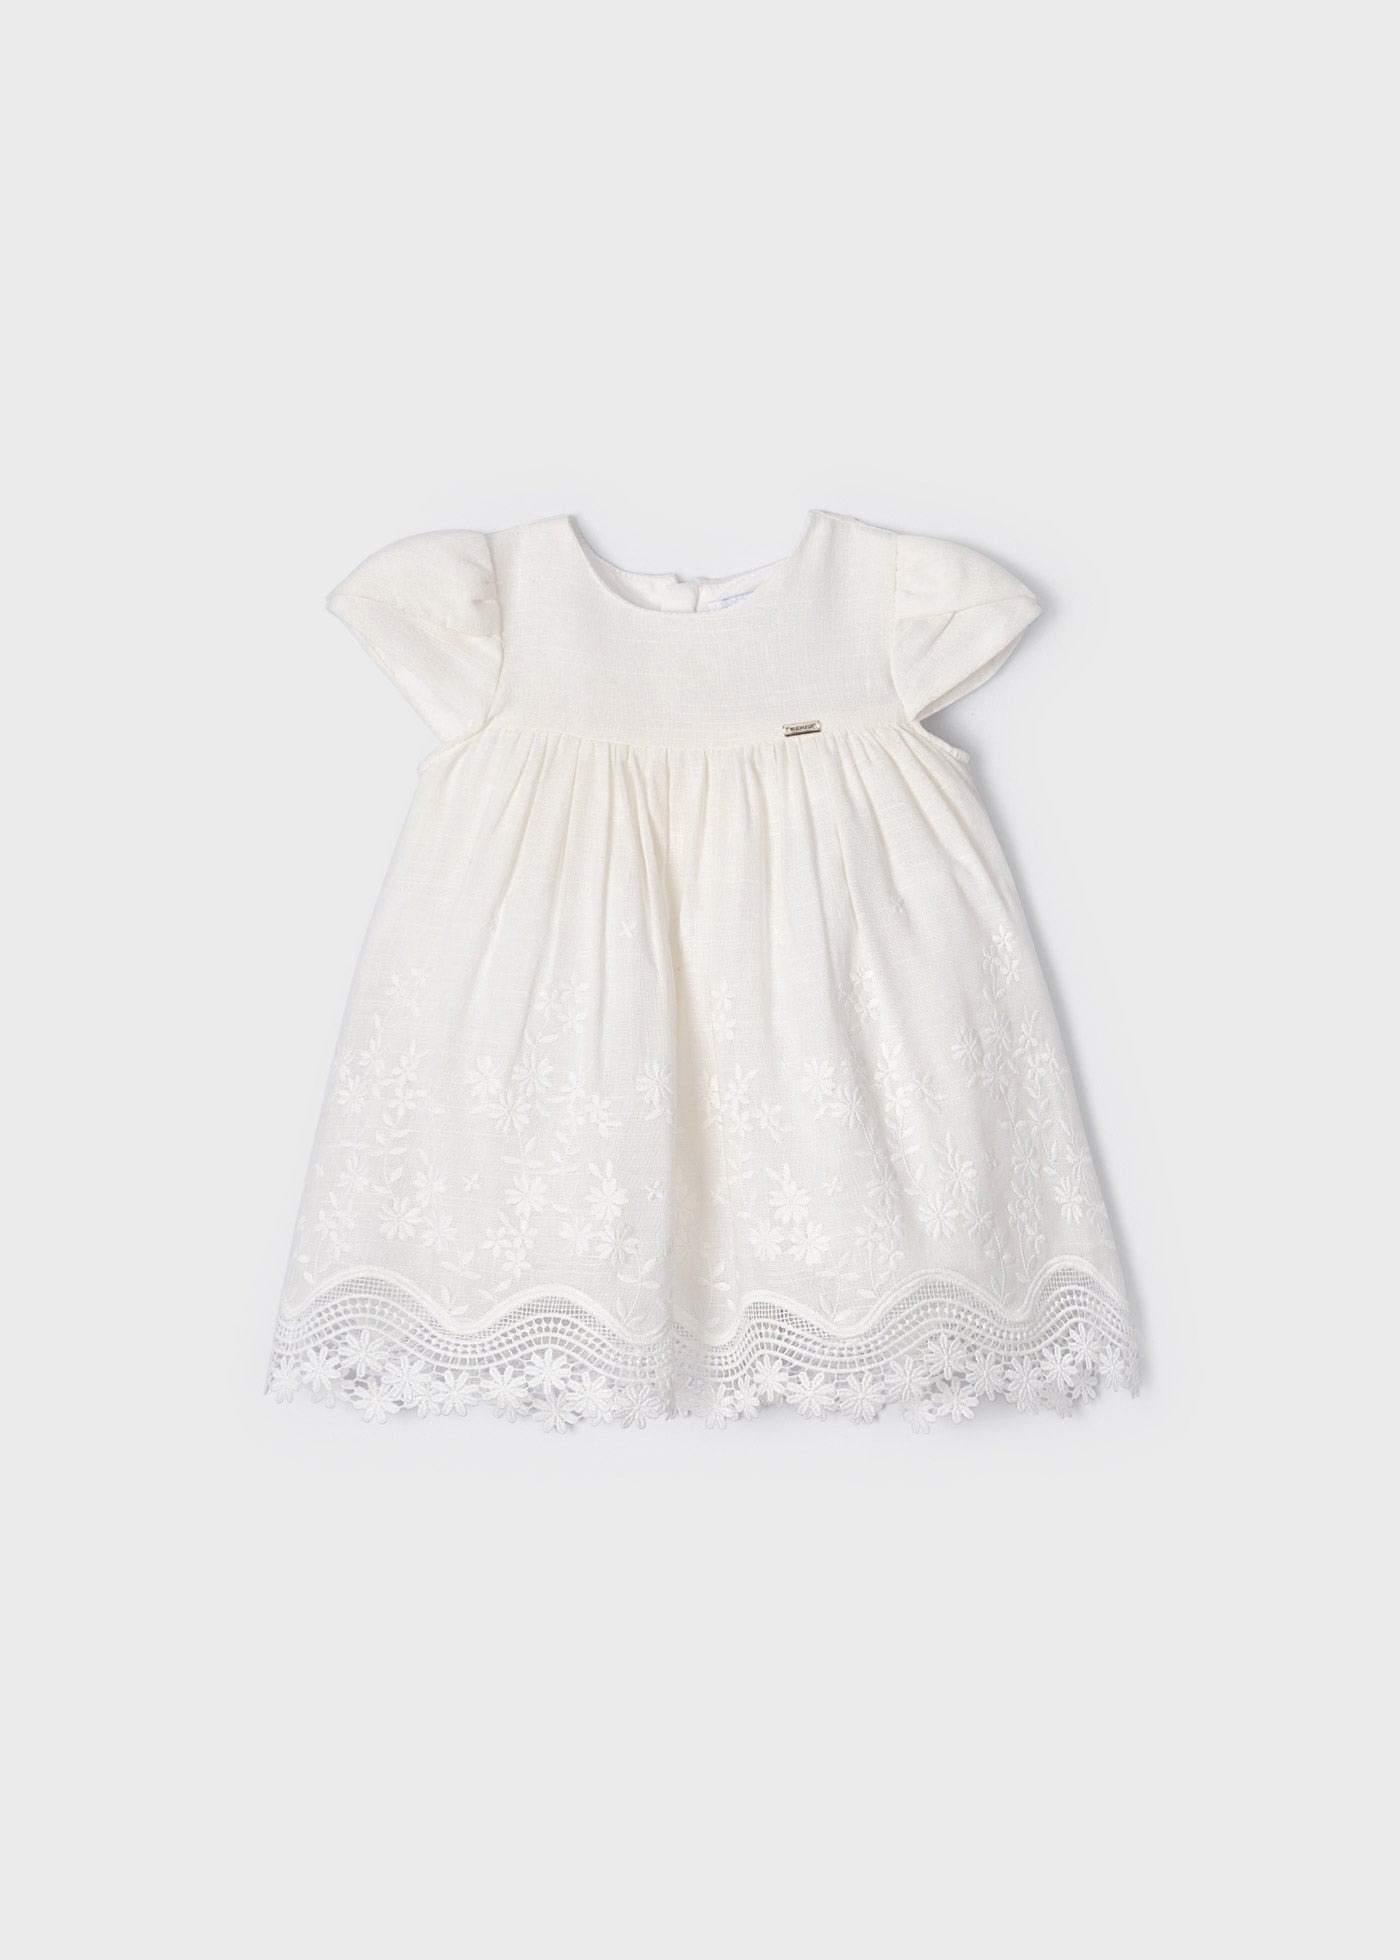 Mayoral Baby Short Sleeve Lace Trimmed Dress _Natural 1906-49